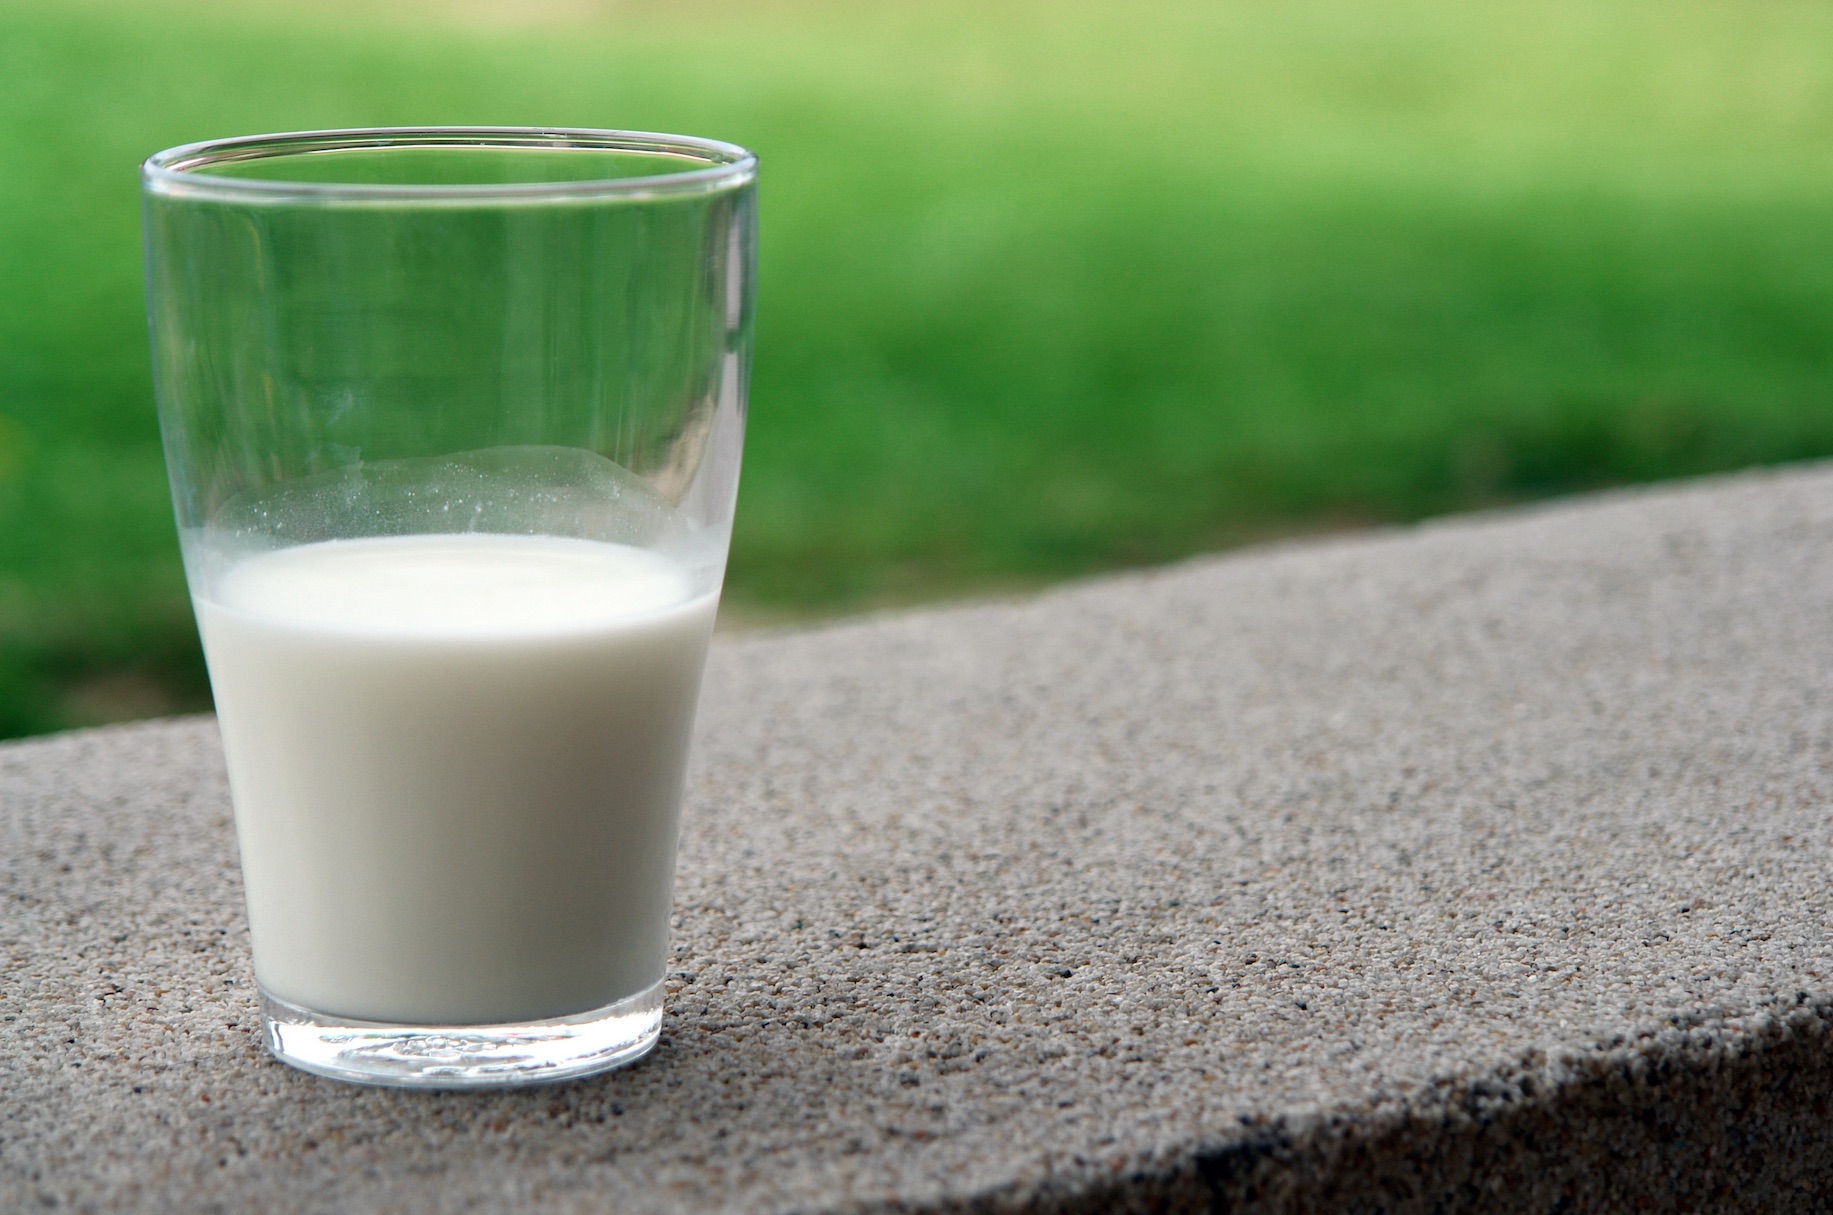 Did the milk shortage affect you?